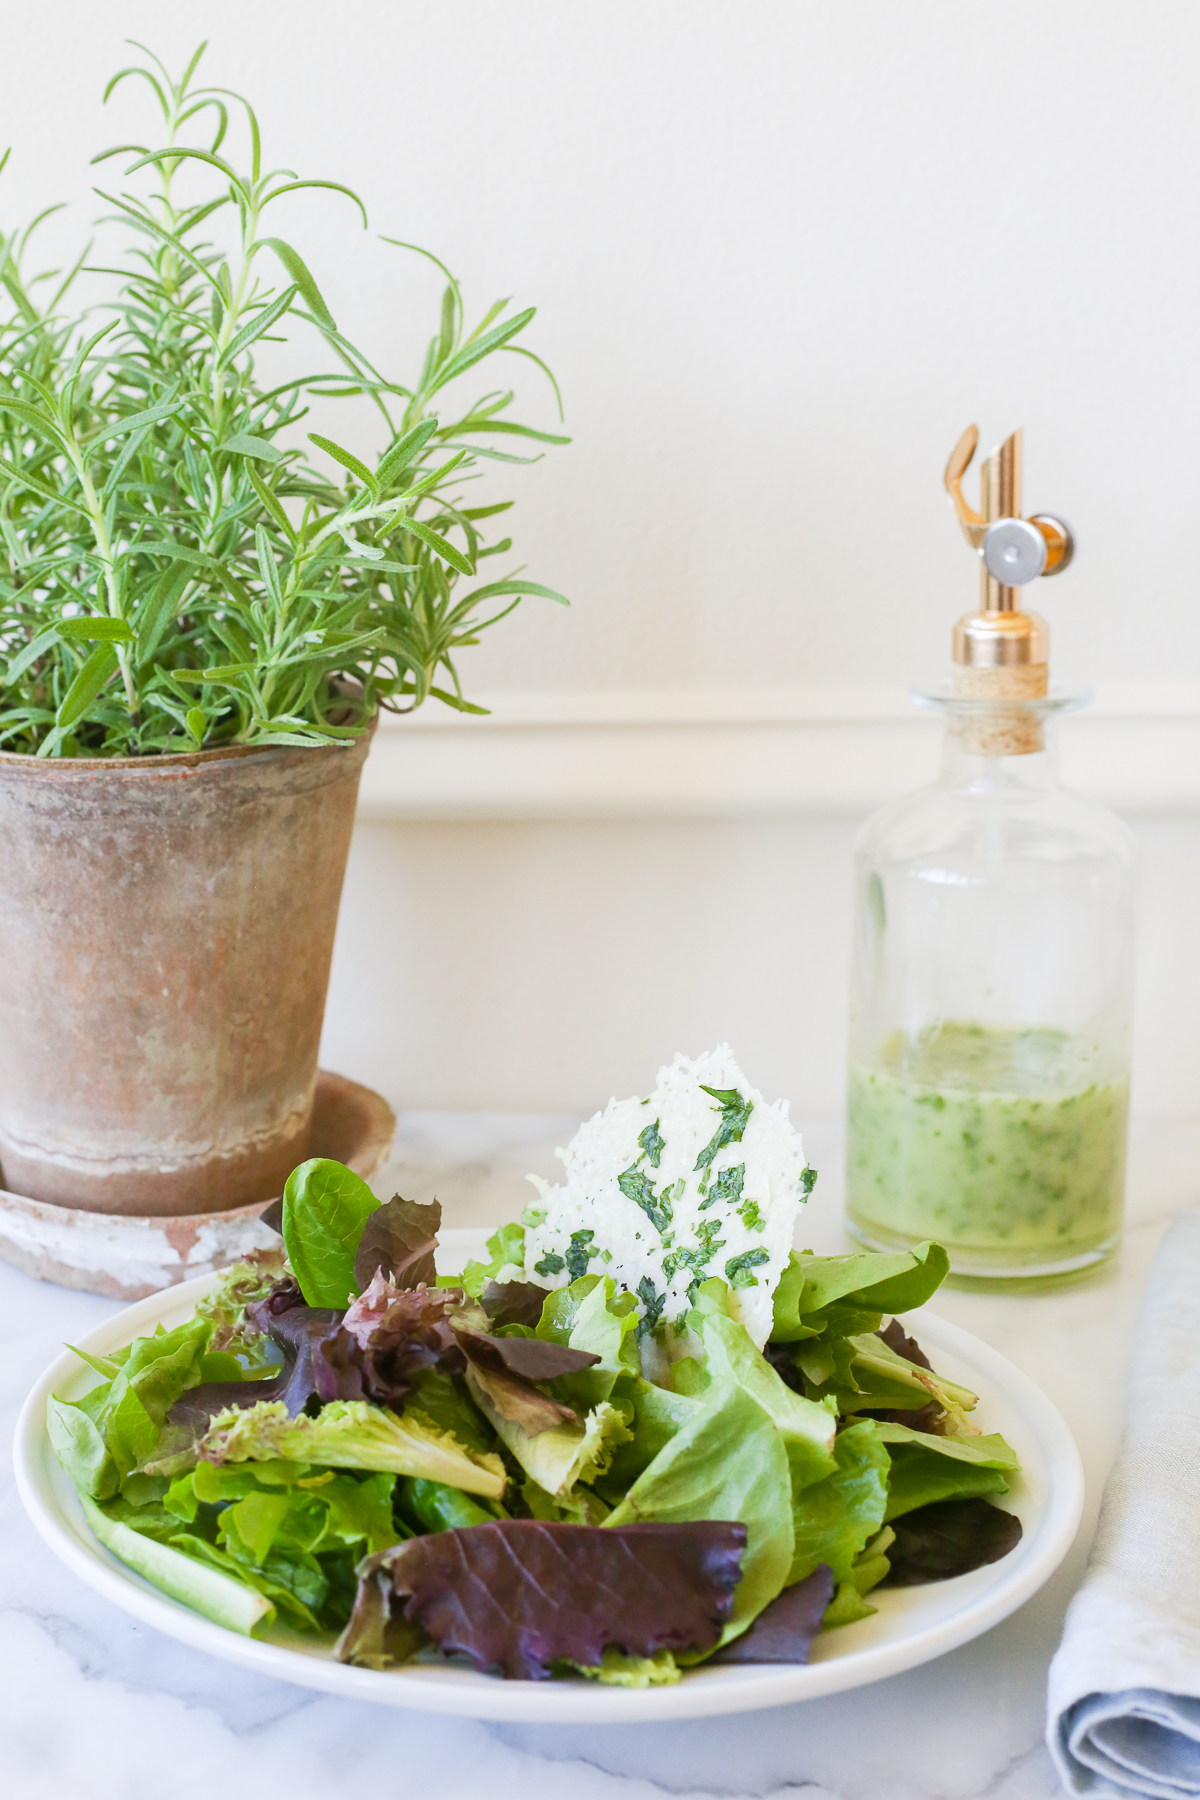 A bottle of homemade vinaigrette next to a plate of salad and a pot of rosemary 